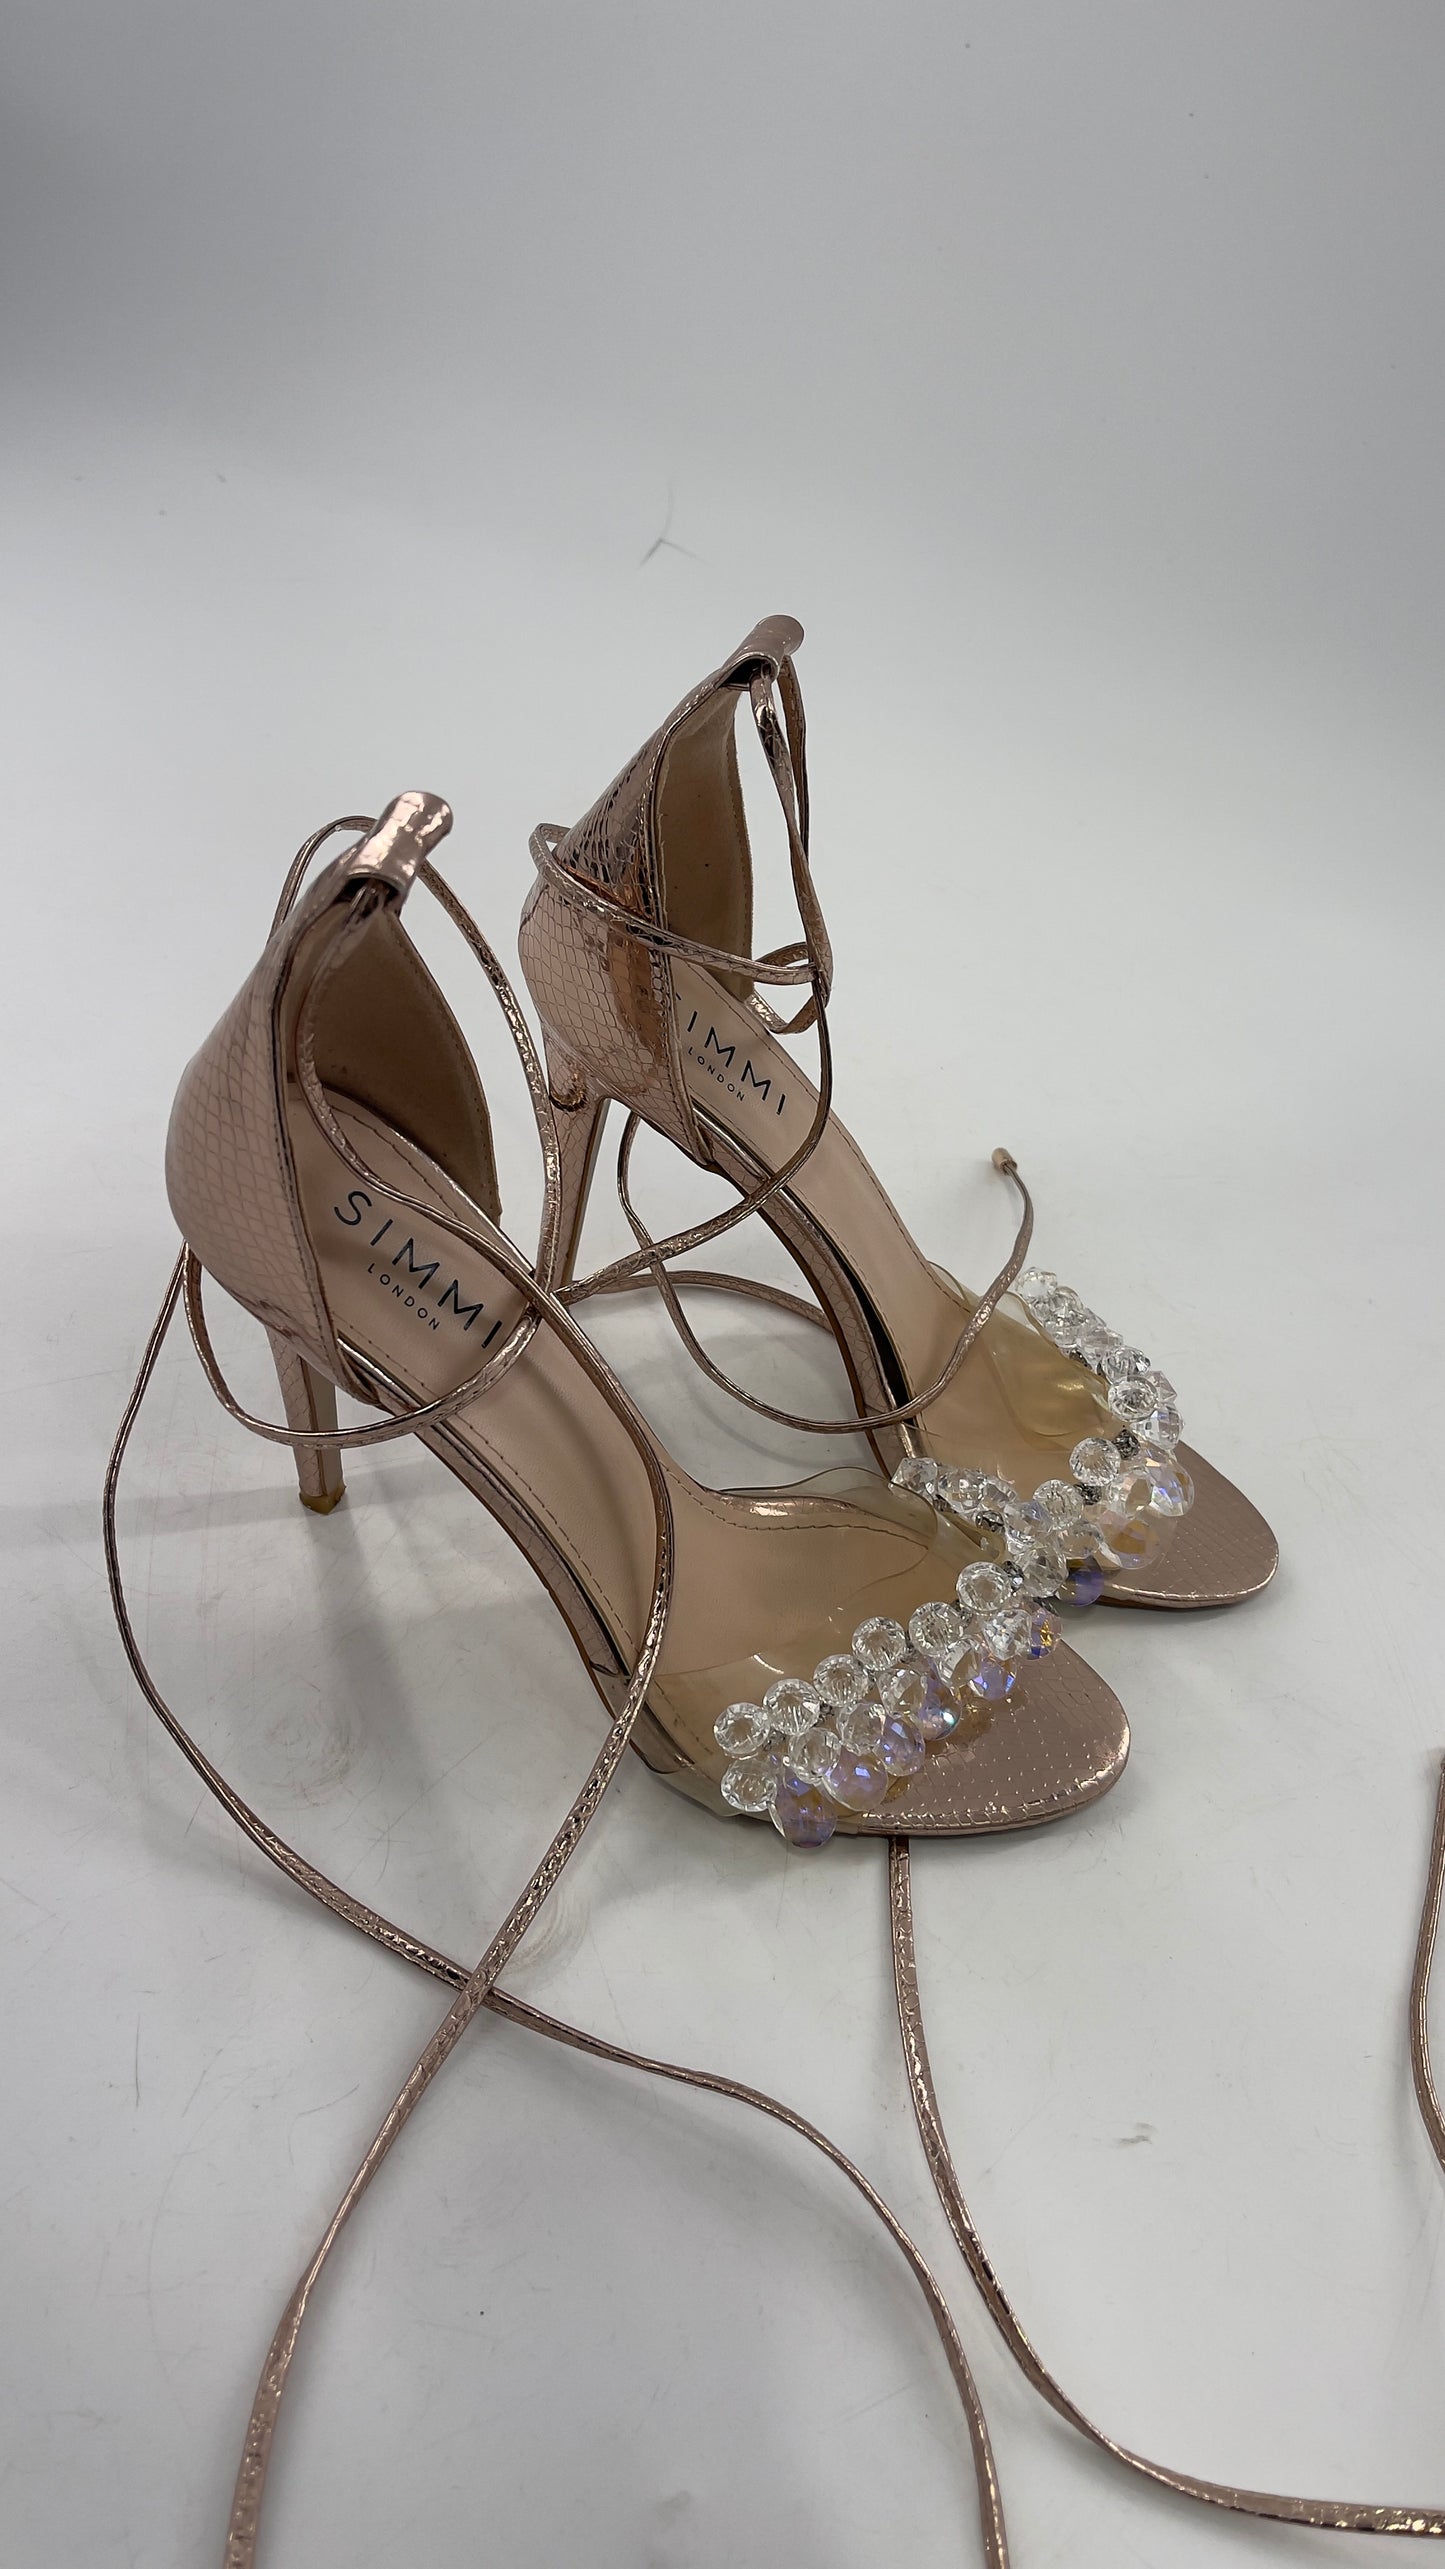 SIMMI LONDON Rose Gold Textured Heels with Clear Toe Strap Covered in Rhinestones/ Crystal Pendants and Tie Up Ankle Straps (7)